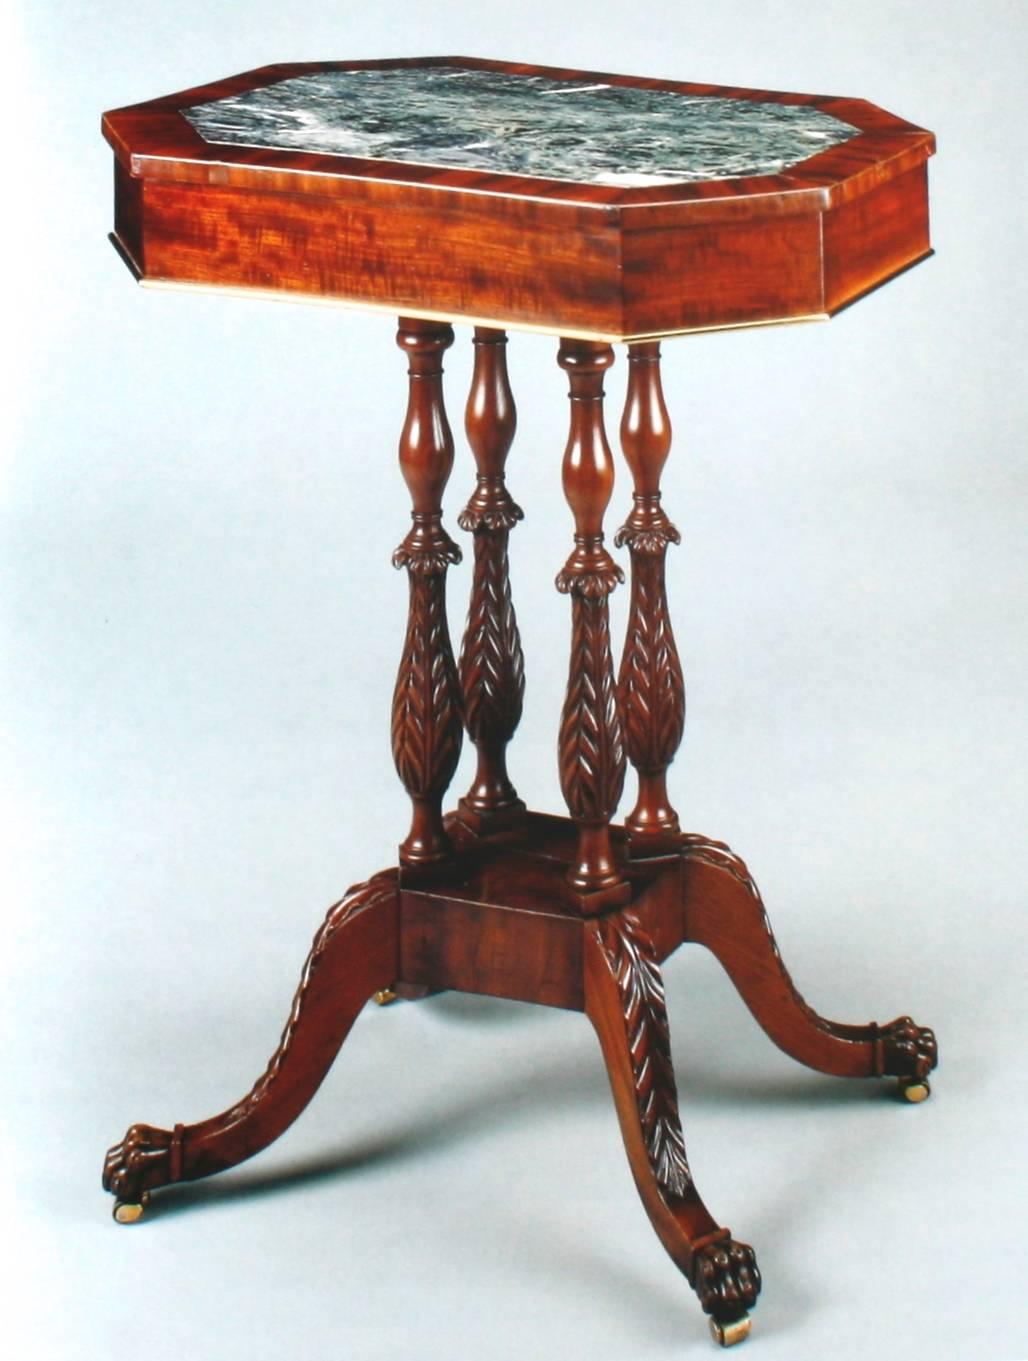 Honoré Lannuier Cabinetmaker from Paris: The Life and Work of a French Ébéniste For Sale 1